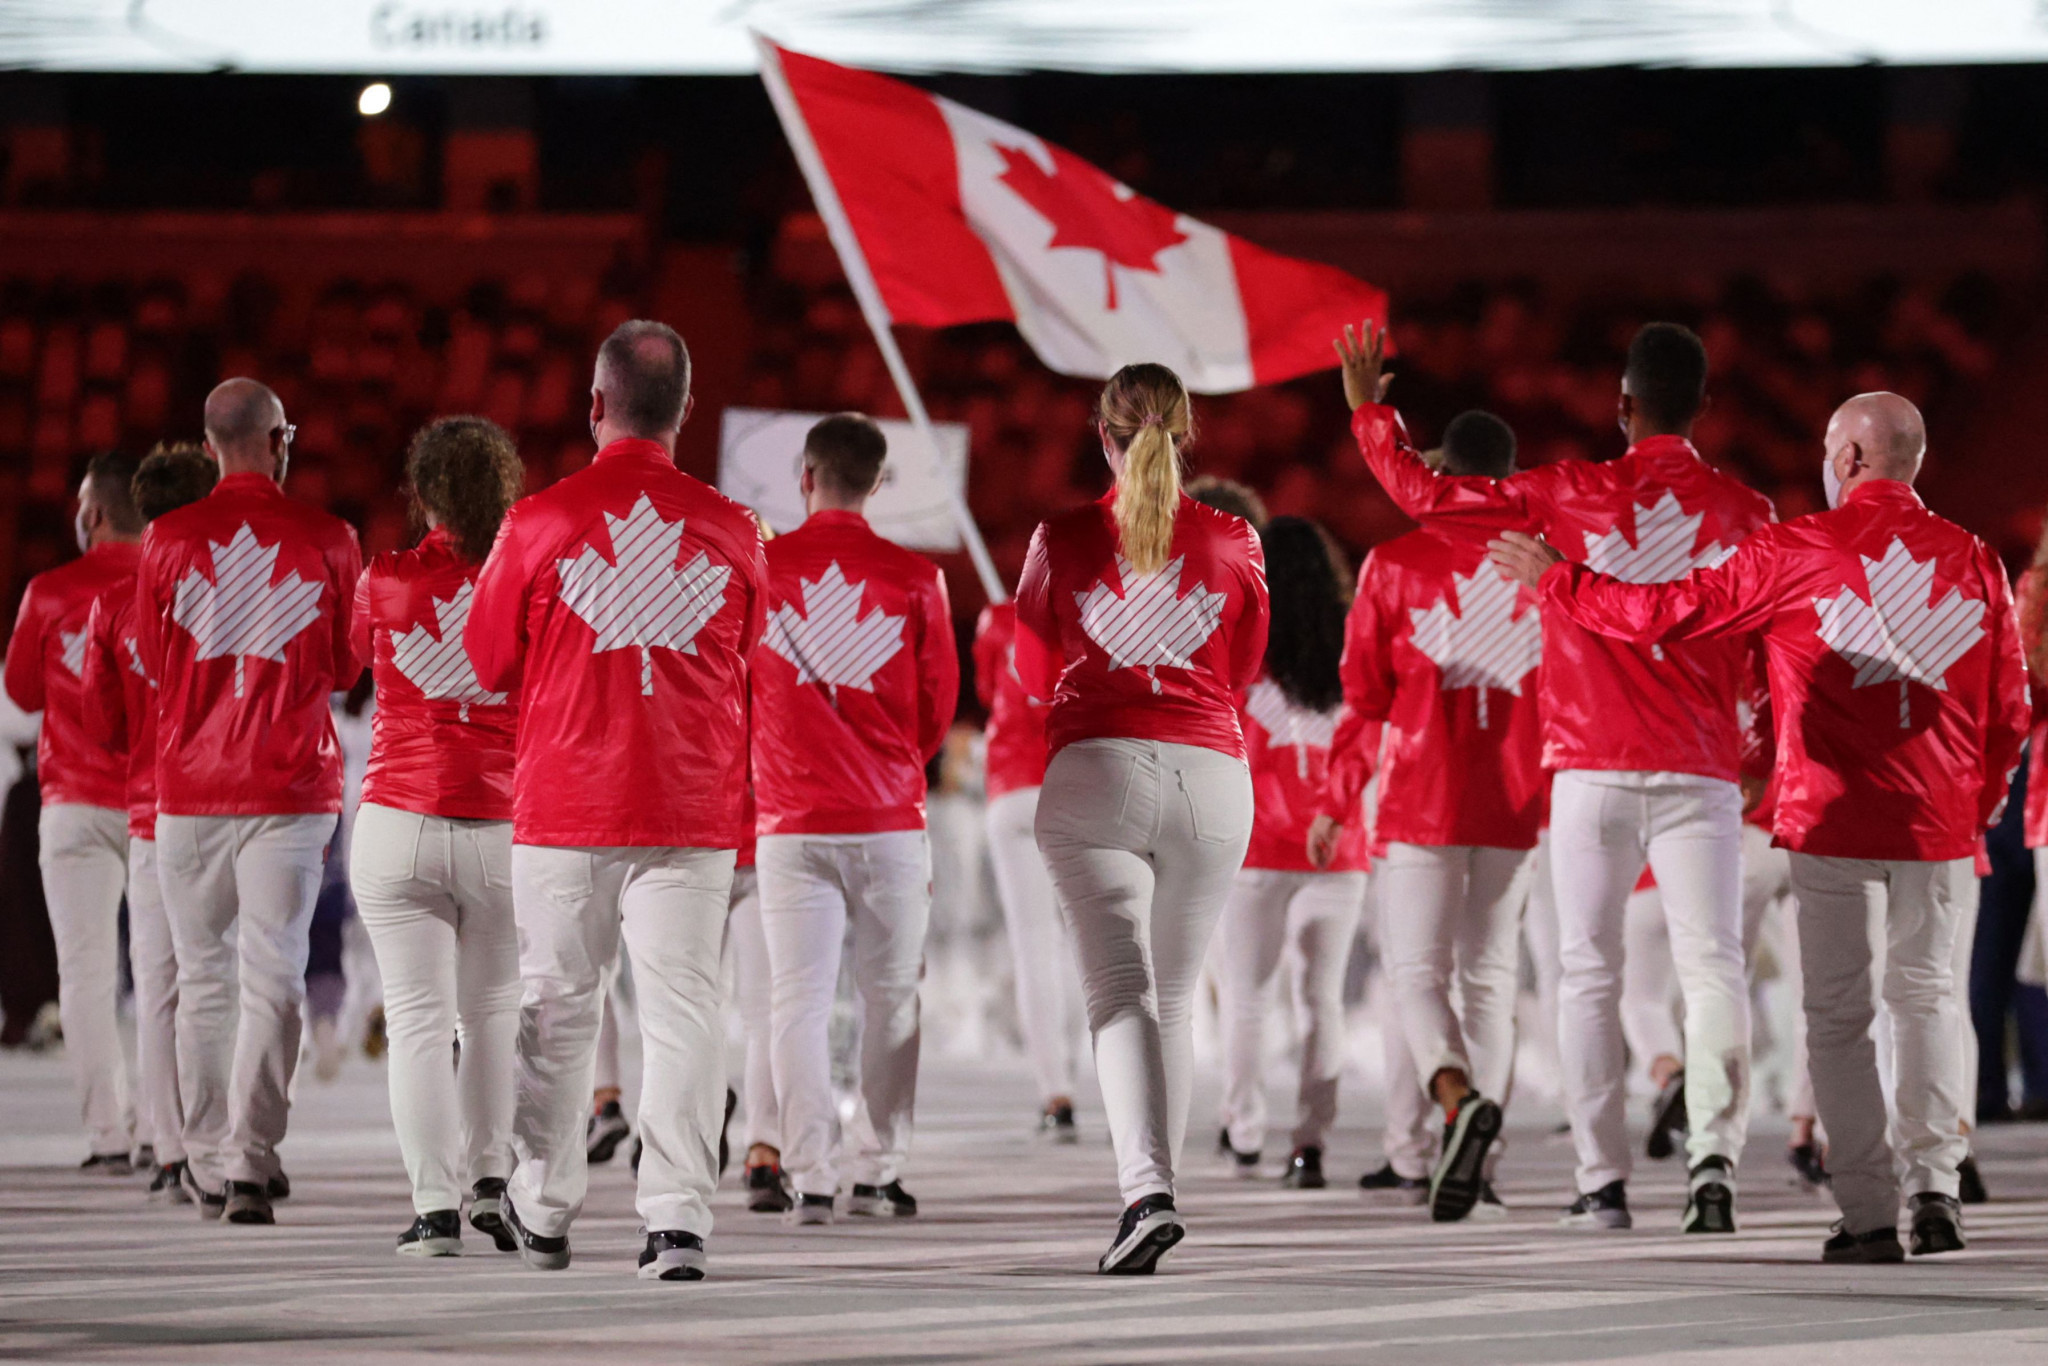 David Shoemaker said the Canadian Olympic Committee delegation did not encounter a single coronavirus case at Tokyo 2020 ©Getty Images